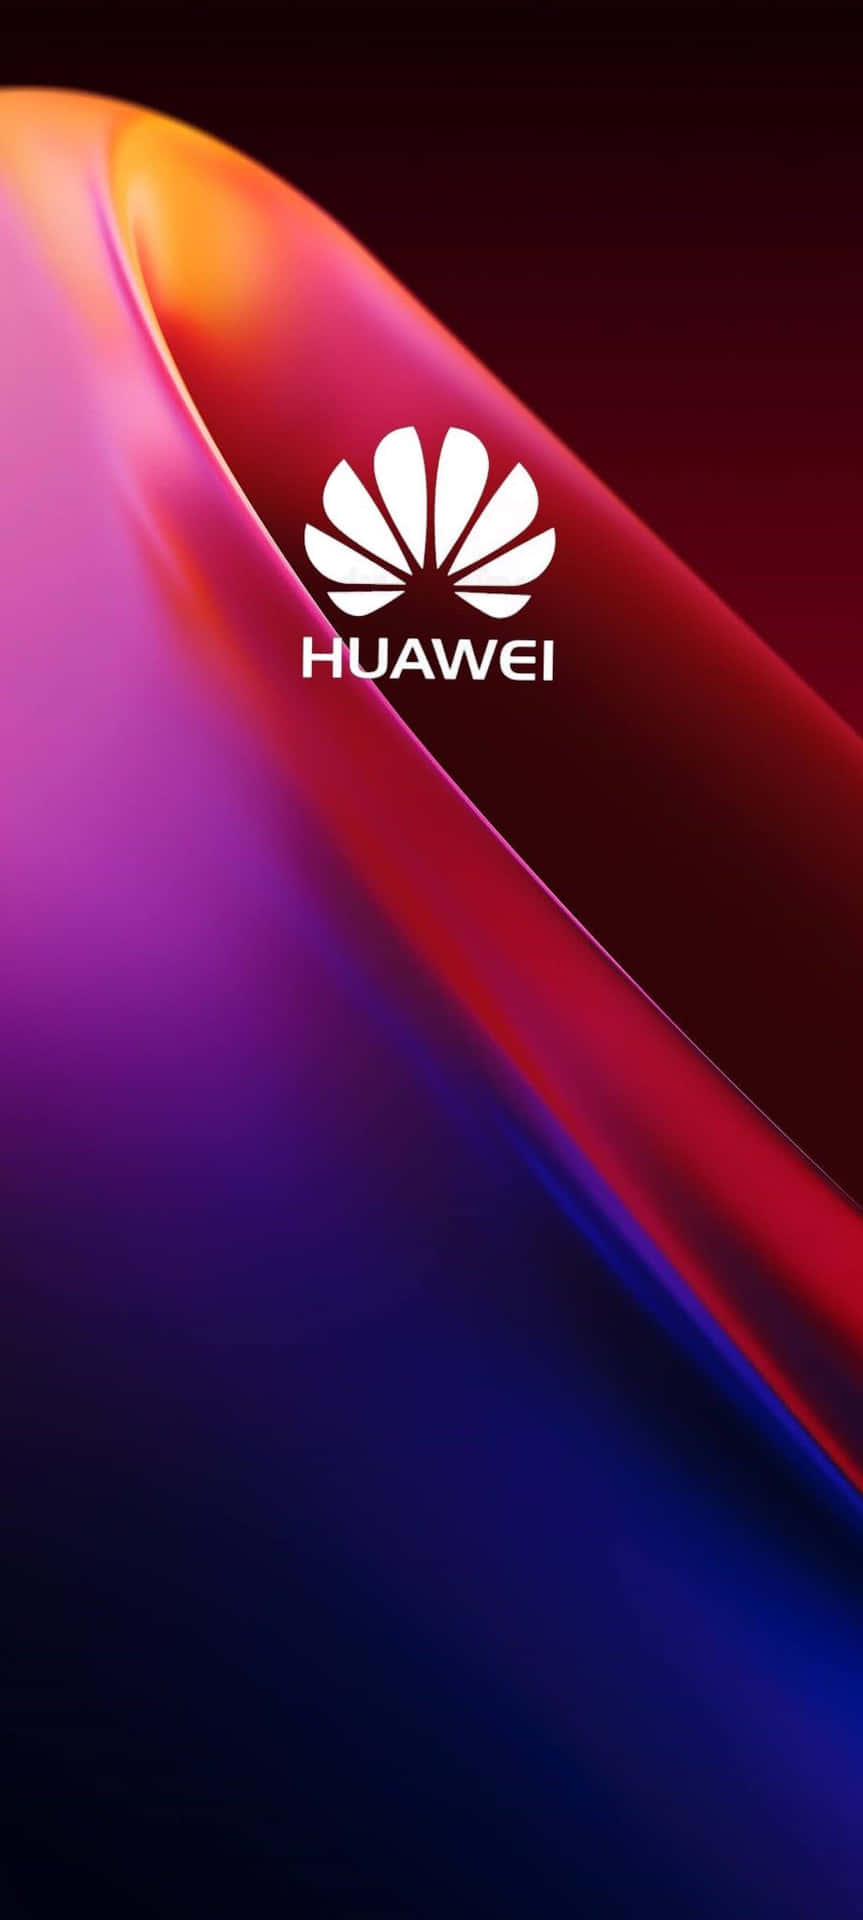 The Future of Communication with Huawei